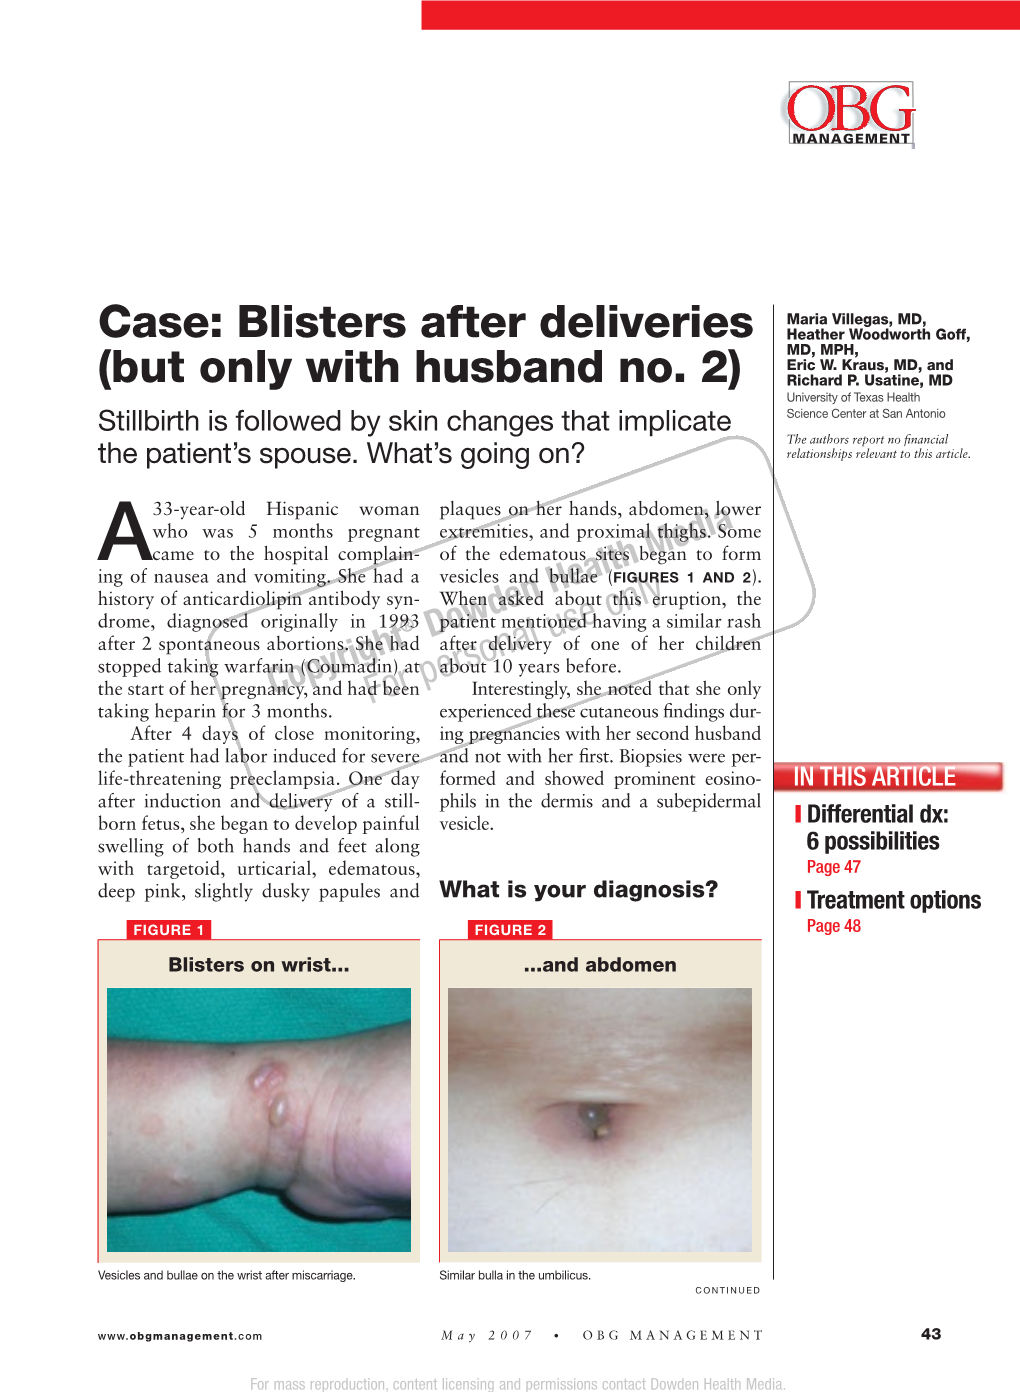 Blisters After Deliveries Heather Woodworth Goff, MD, MPH, Eric W